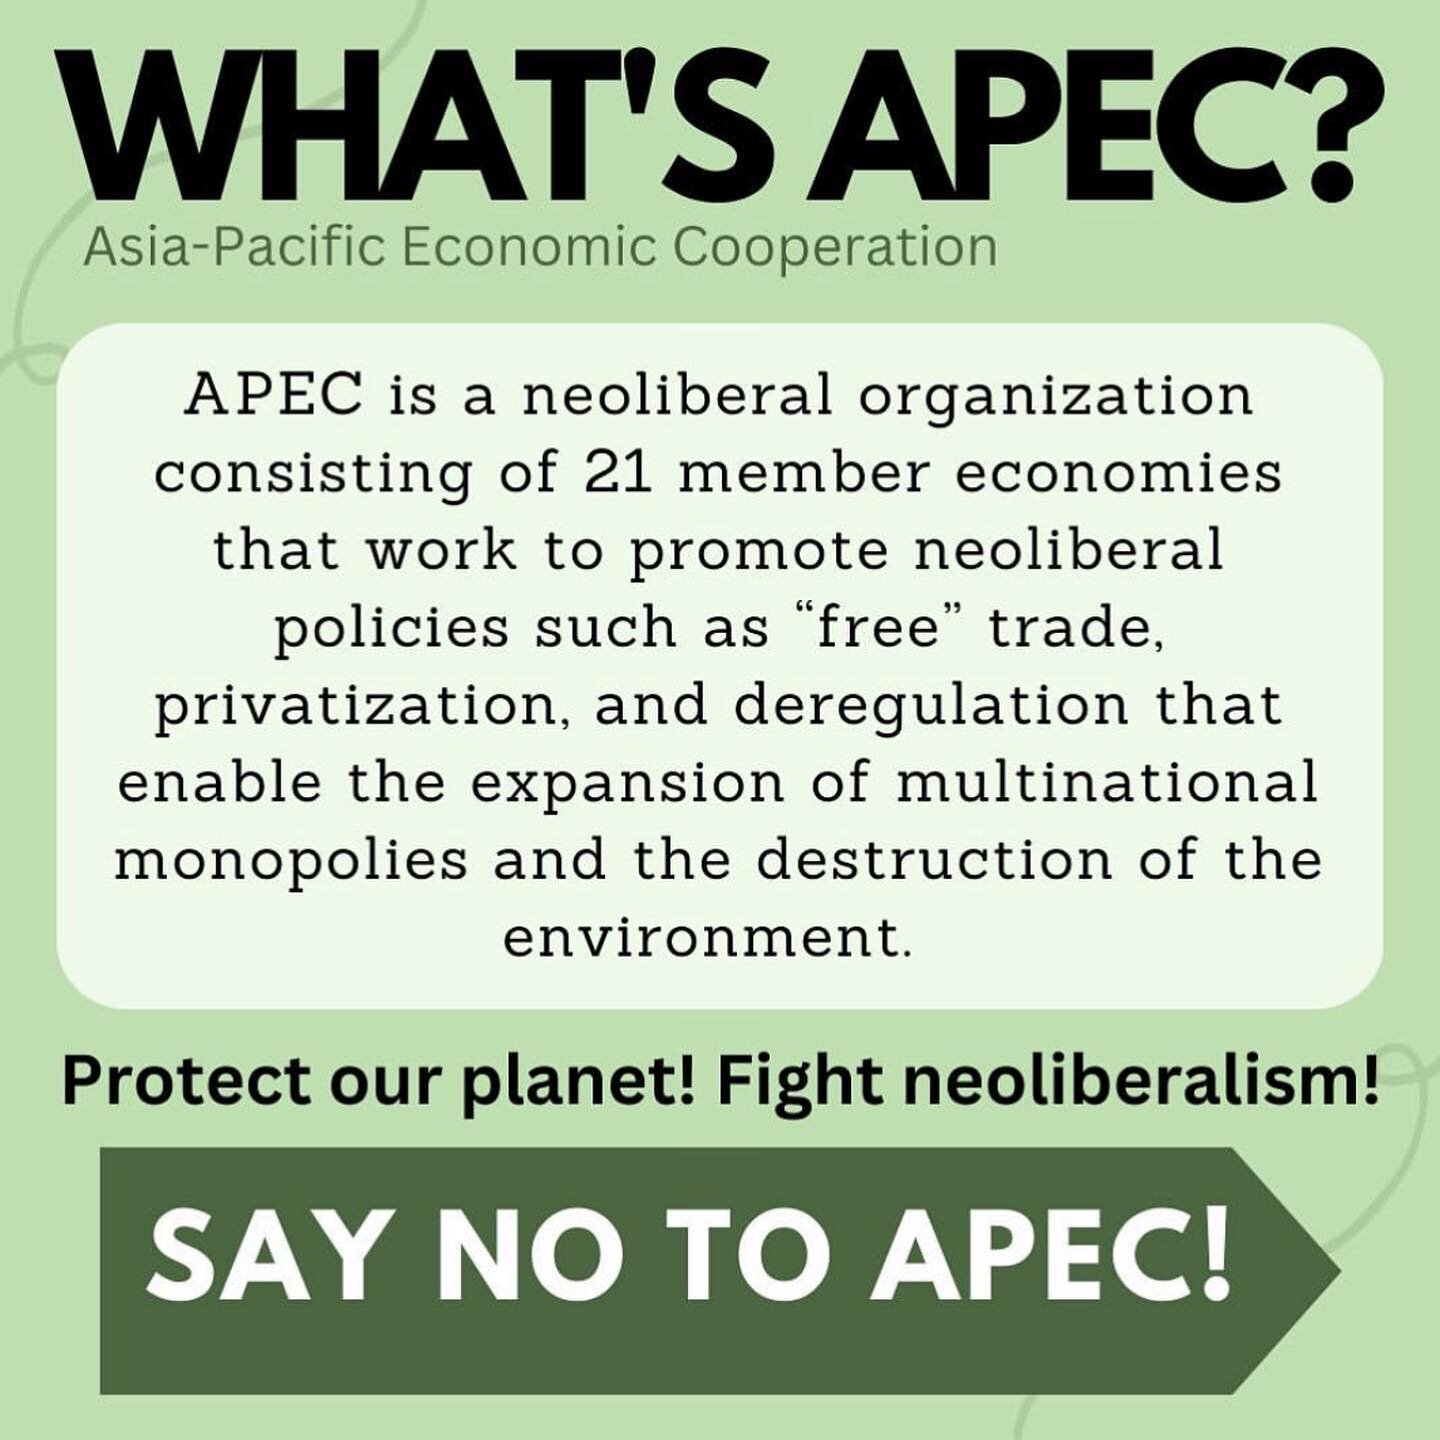 Learn more about how APEC is exploiting people locally and globally to drive profits for these multinational monopoly corporations 🤡🍅💩 Join the panel tomorrow, Wednesday 4/26 from 5:30-7:30PM PST 

RSVP here: tinyurl.com/climatePNWPOP